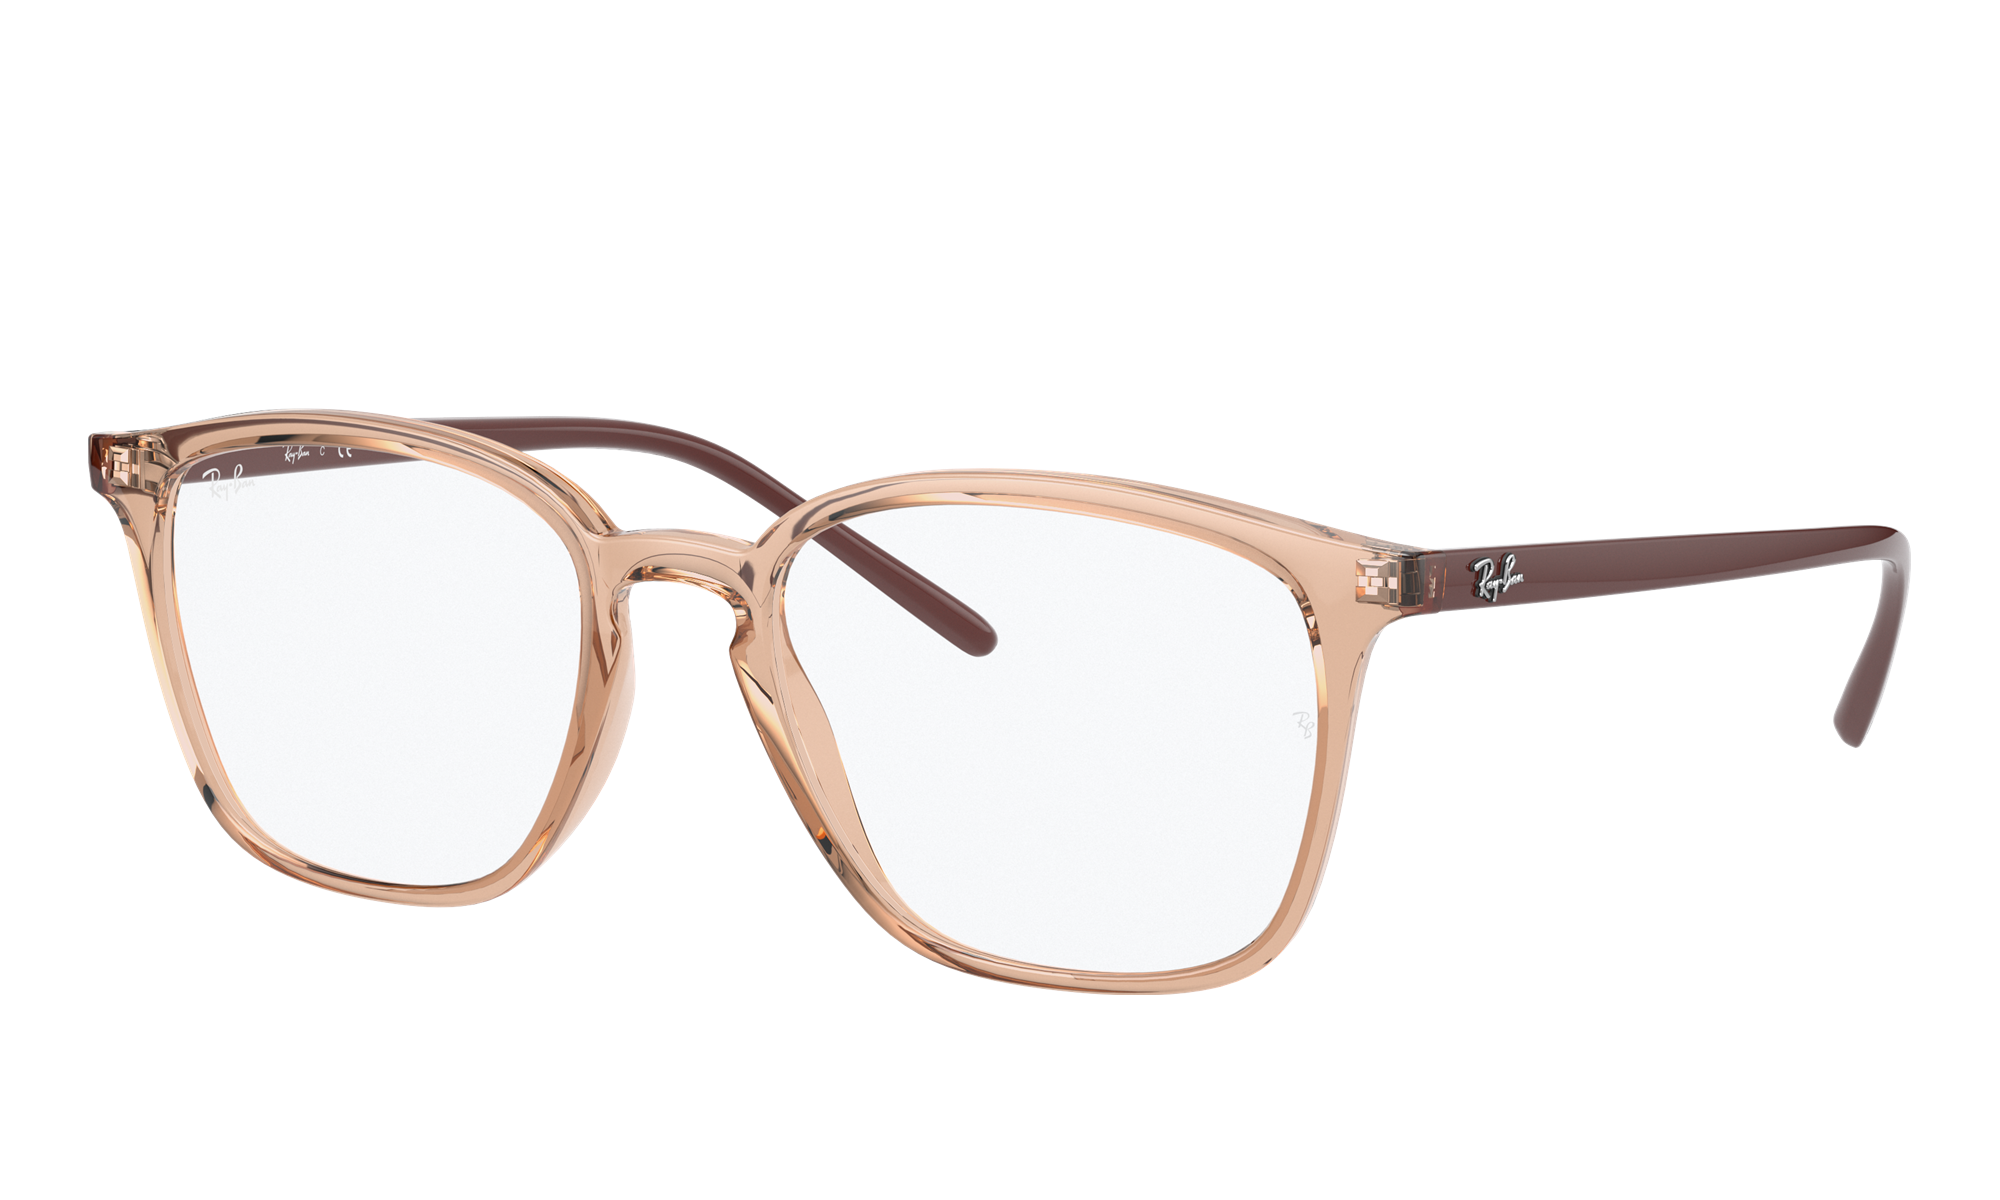 Ray-Ban Unisex Rx7185 Light Brown Size: Extra Small